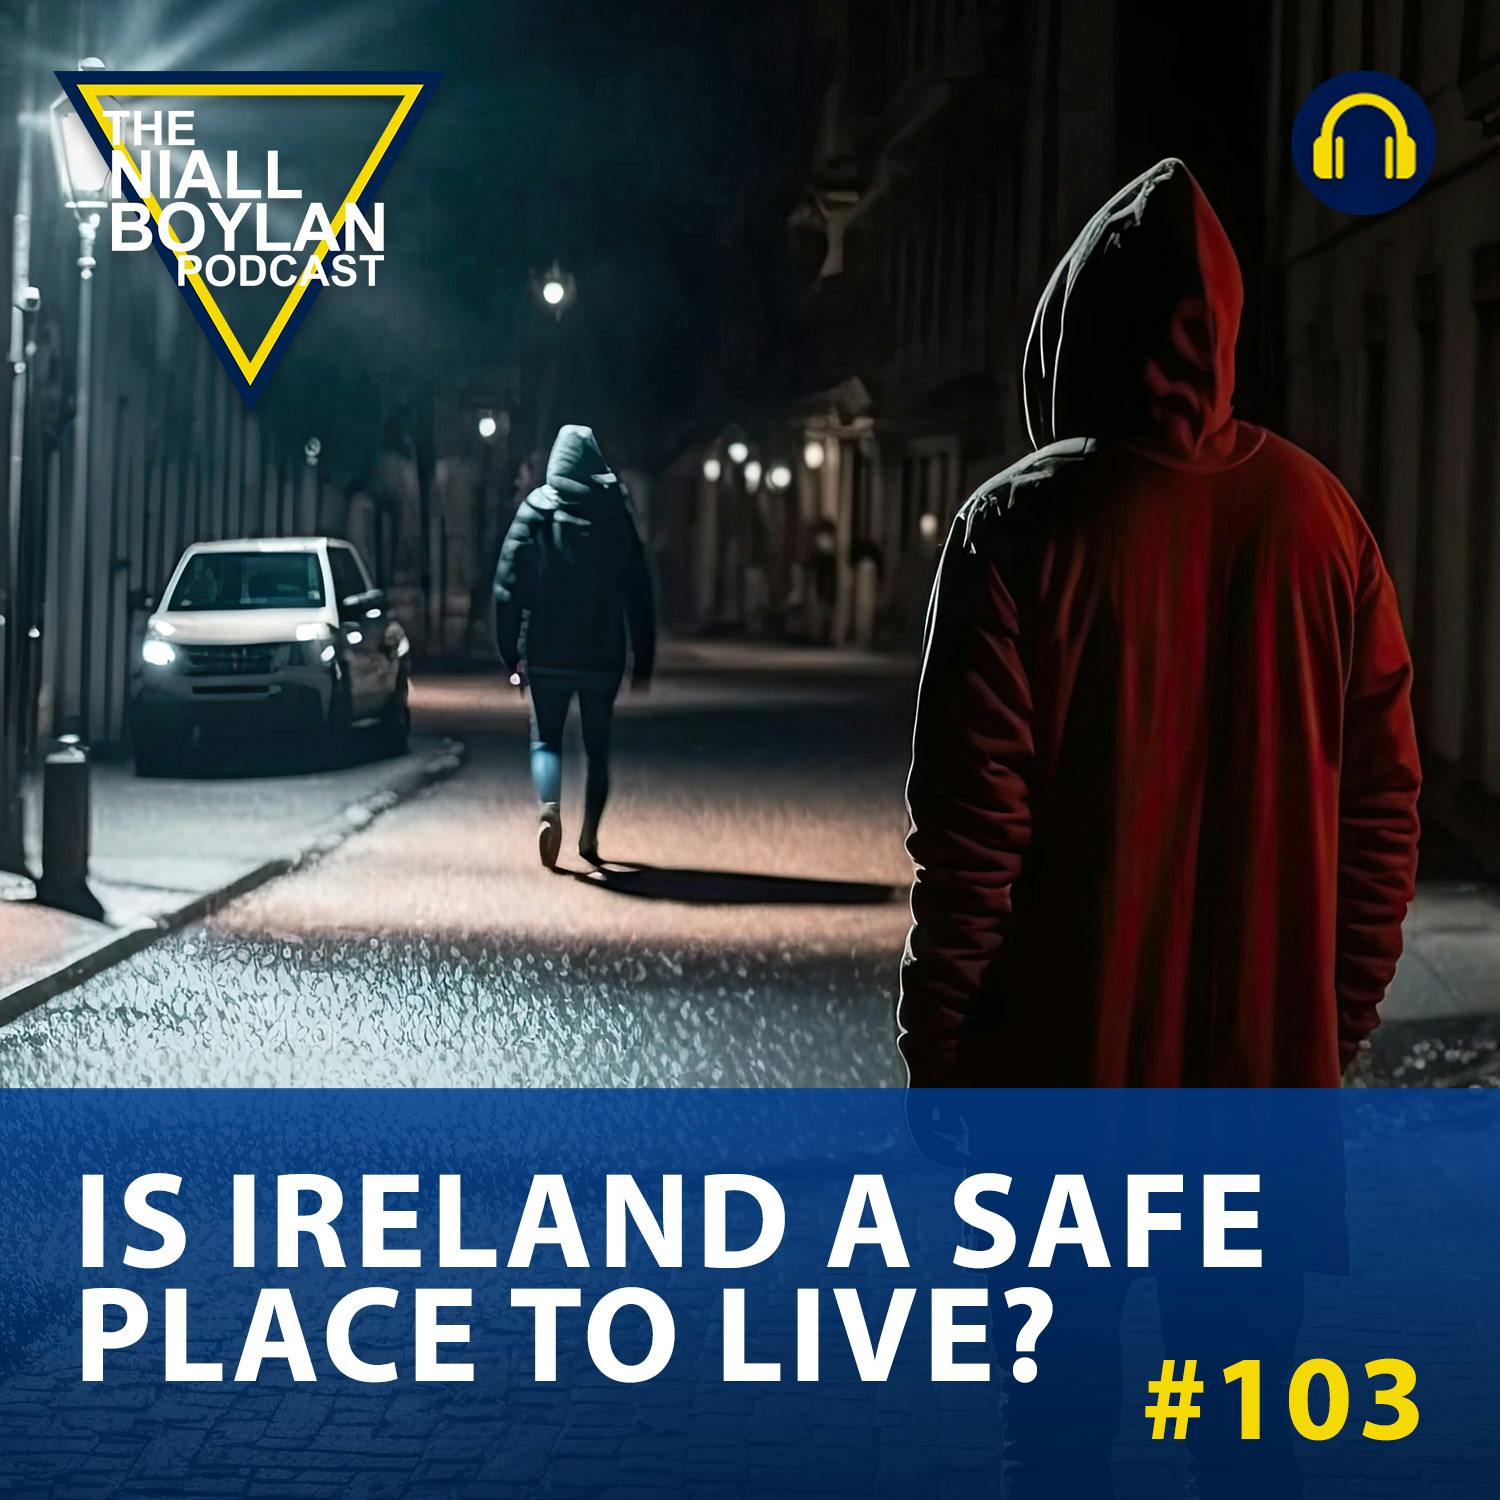 #103 Is Ireland A Safe Place To LIve?